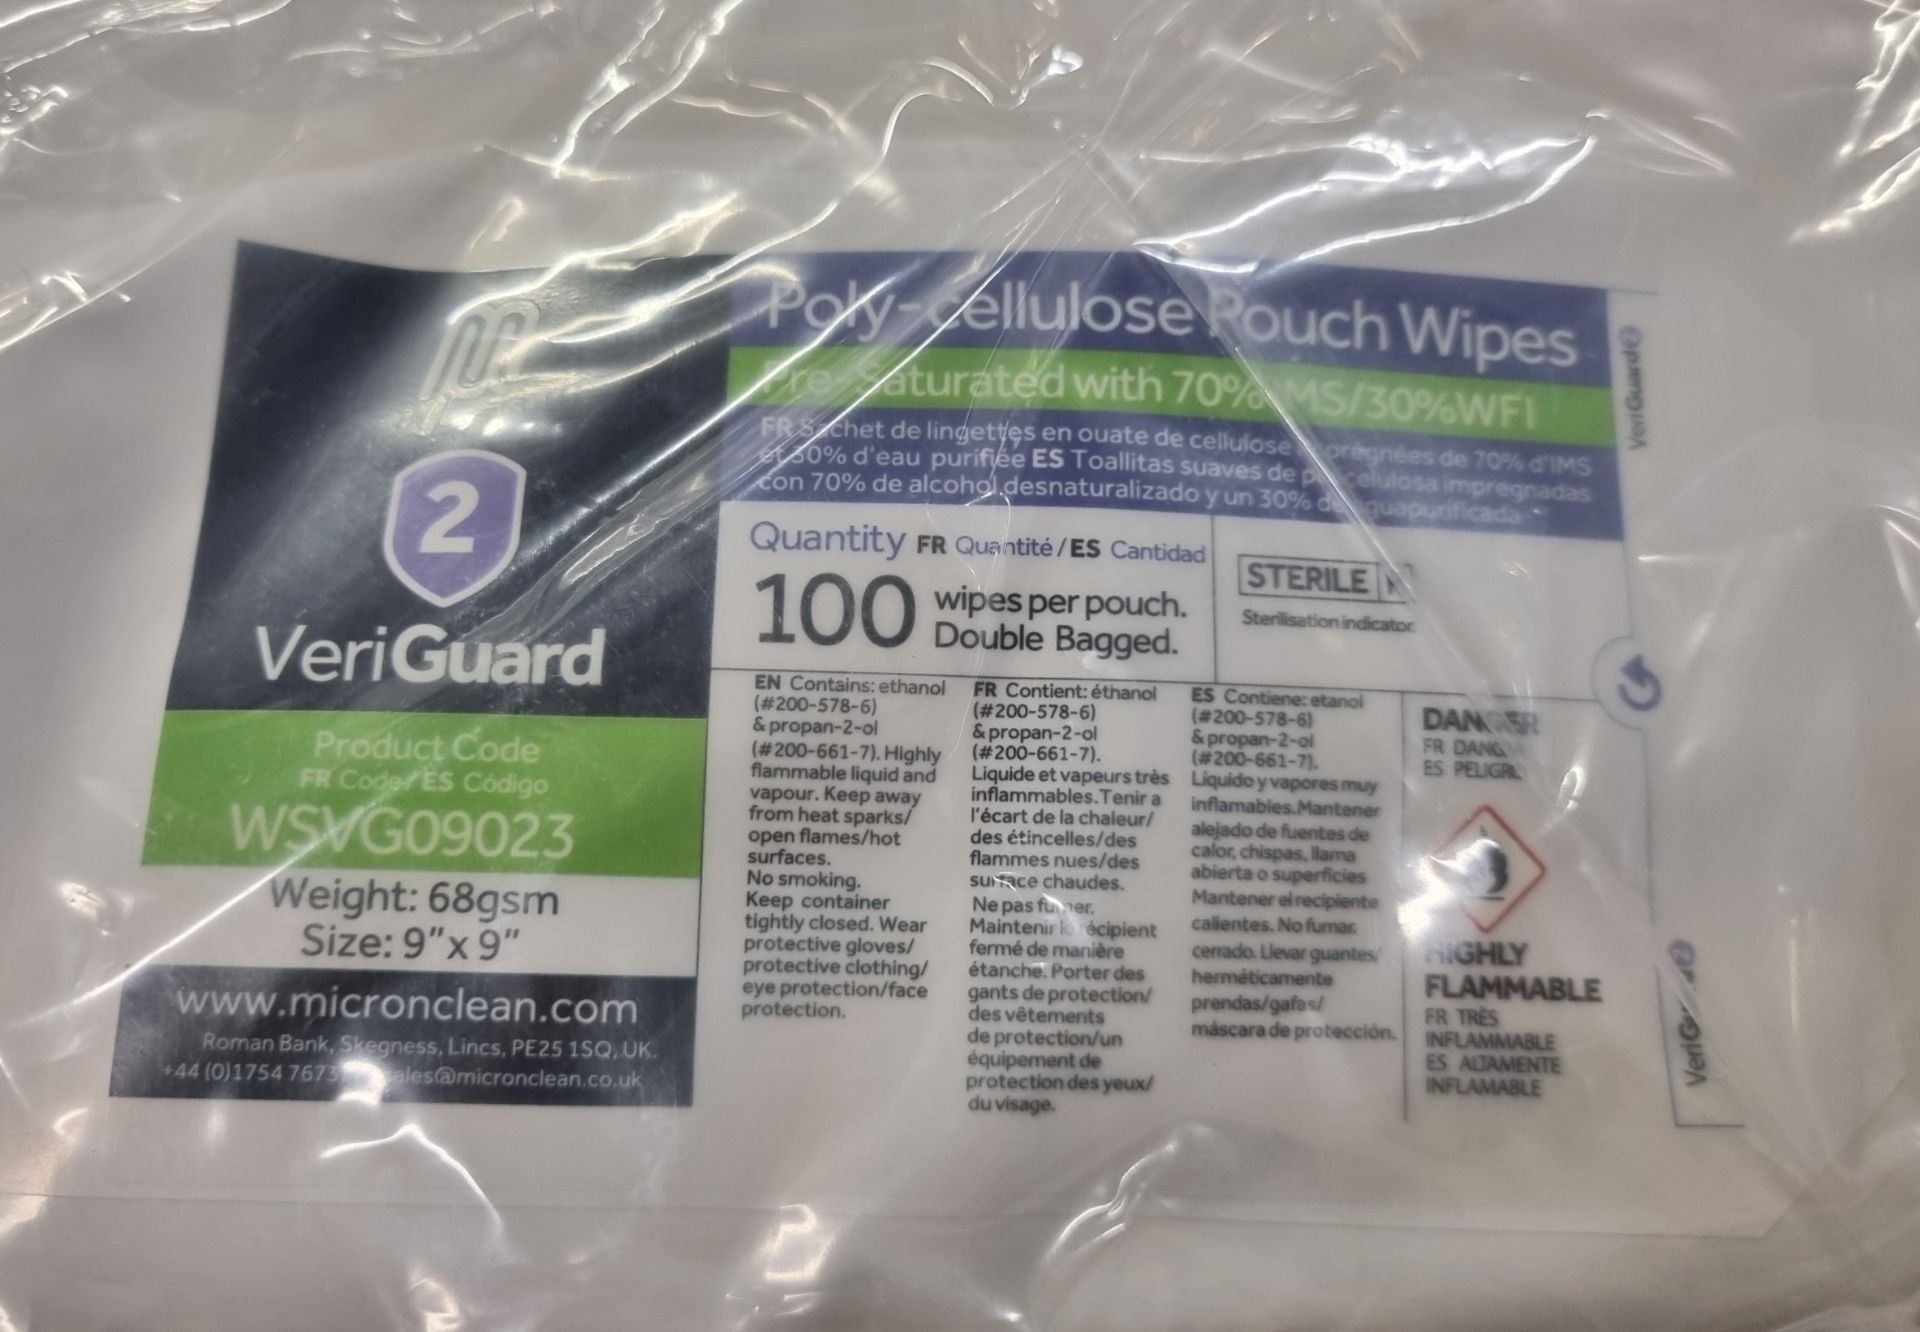 36x boxes of Micronclean Veriguard Polycellulose C-folded pouch wipe sterile - 230mm x 230mm - Image 3 of 4